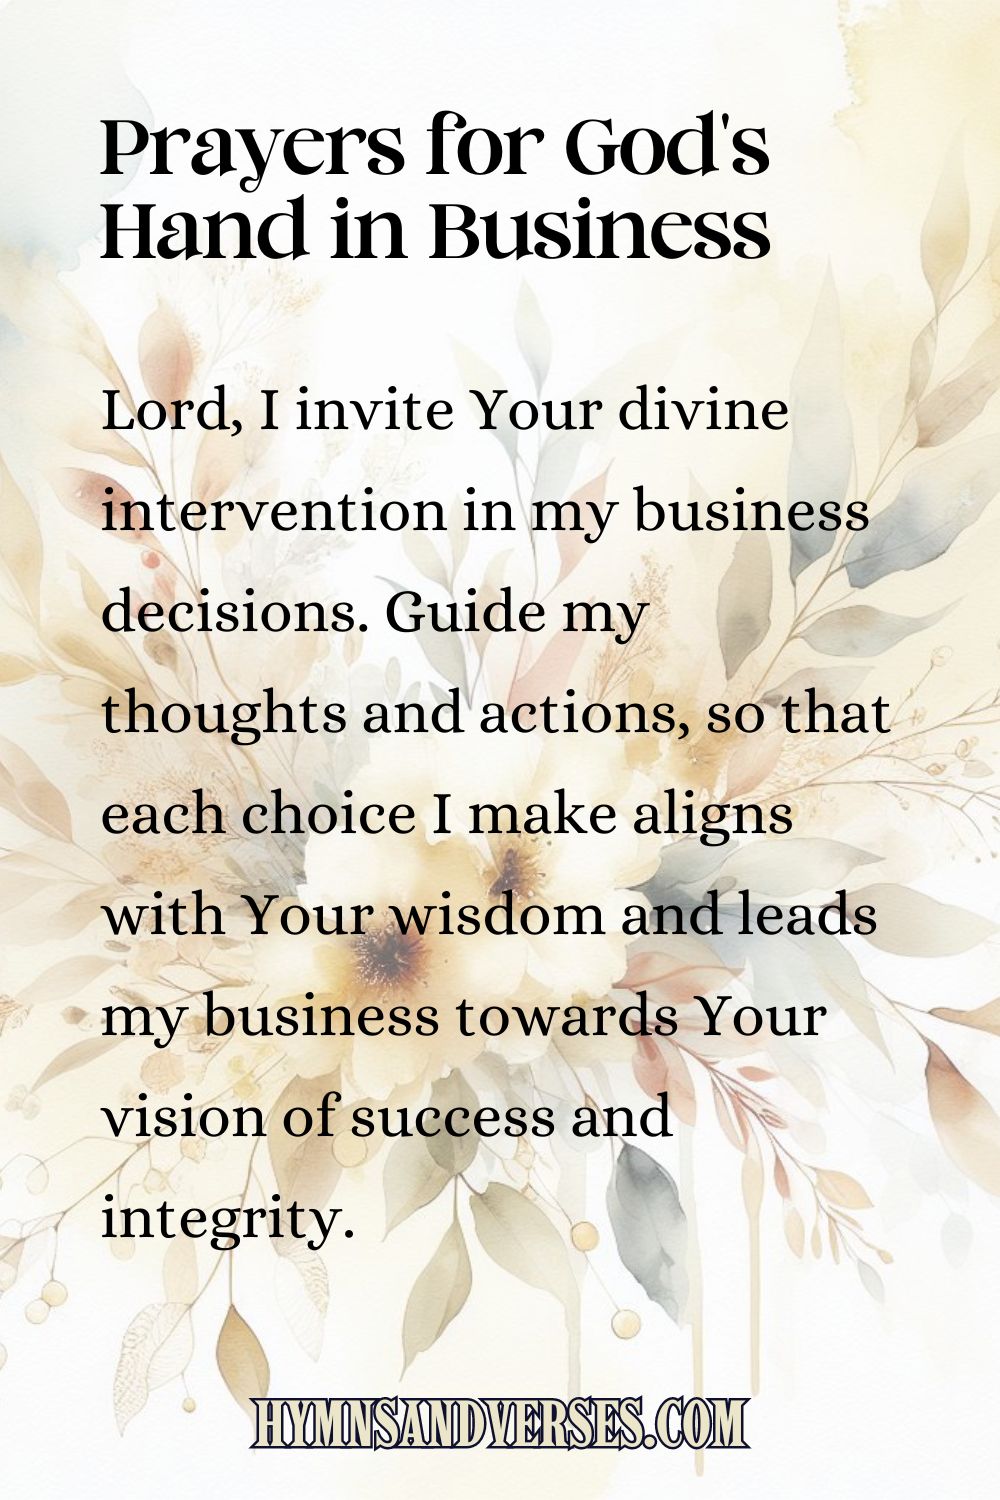 Pin sized image for Prayers for God's Hand in Business, reads: Lord, I invite Your divine intervention in my business decisions. Guide my thoughts and actions, so that each choice I make aligns with Your wisdom and leads my business towards Your vision of success and integrity.